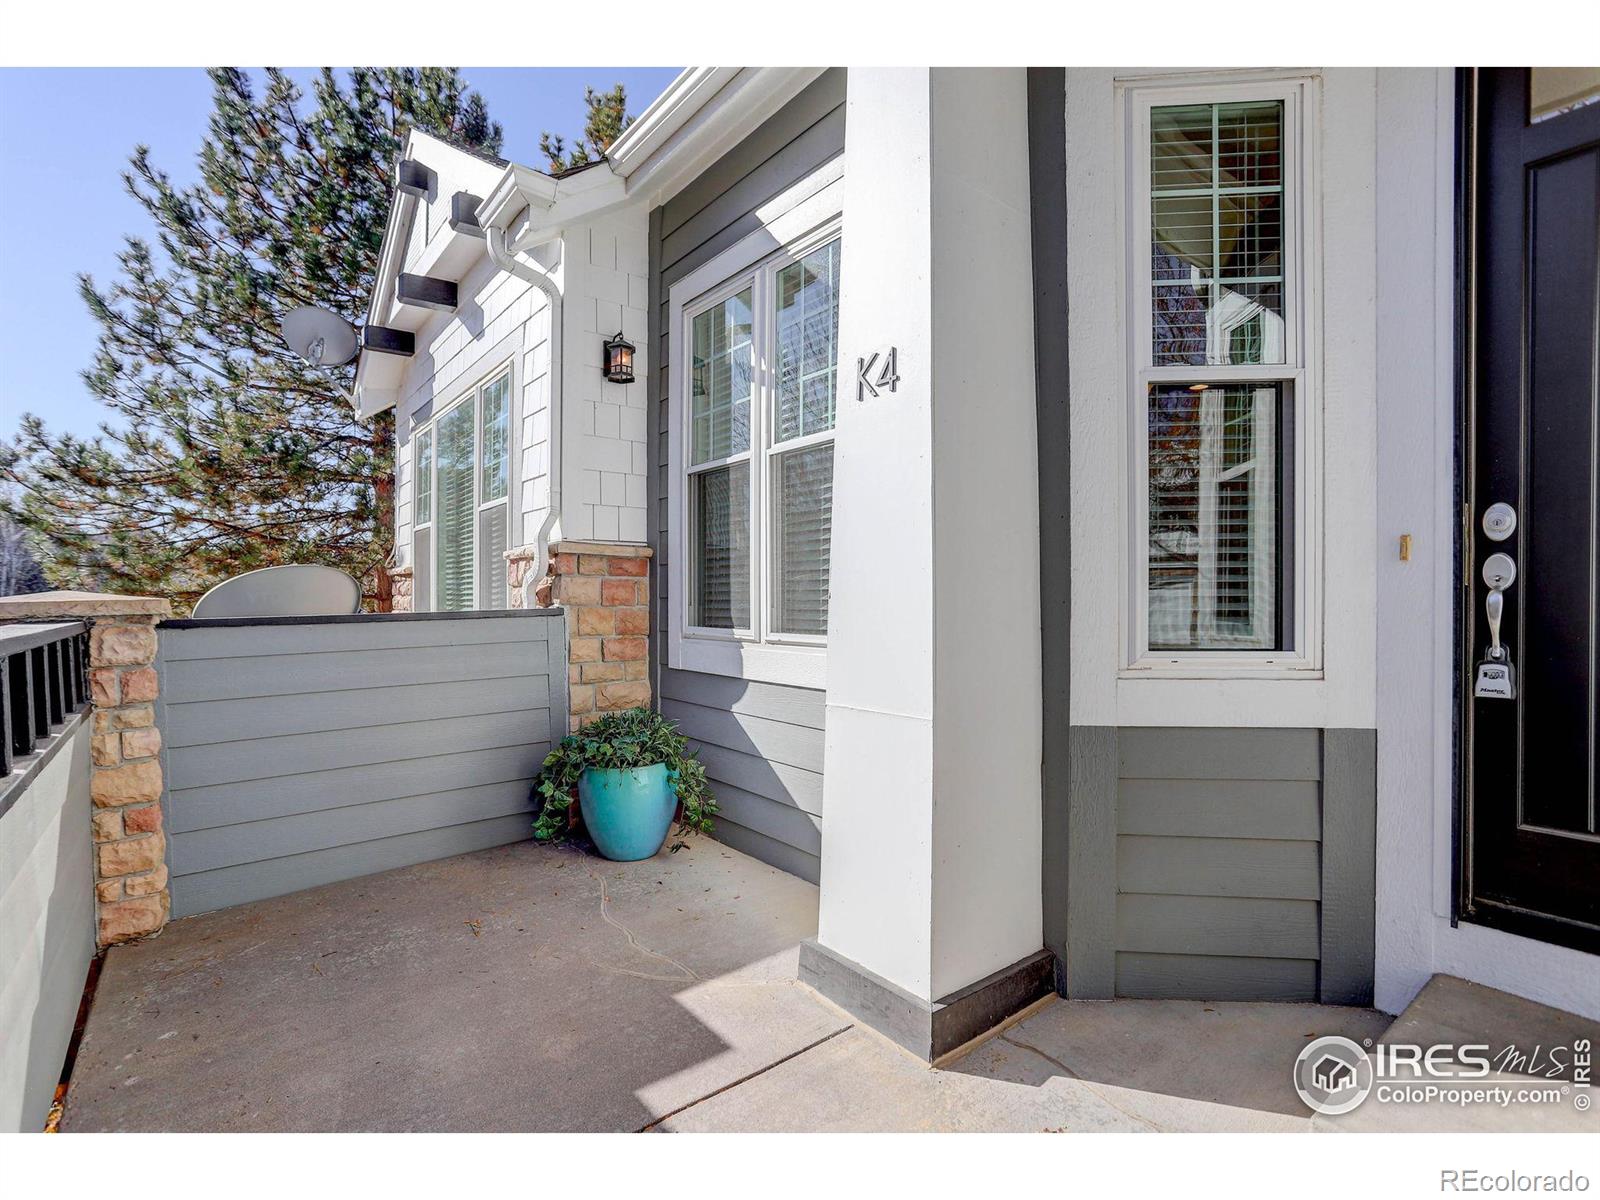 Report Image for 2550  Winding River Drive,Broomfield, Colorado